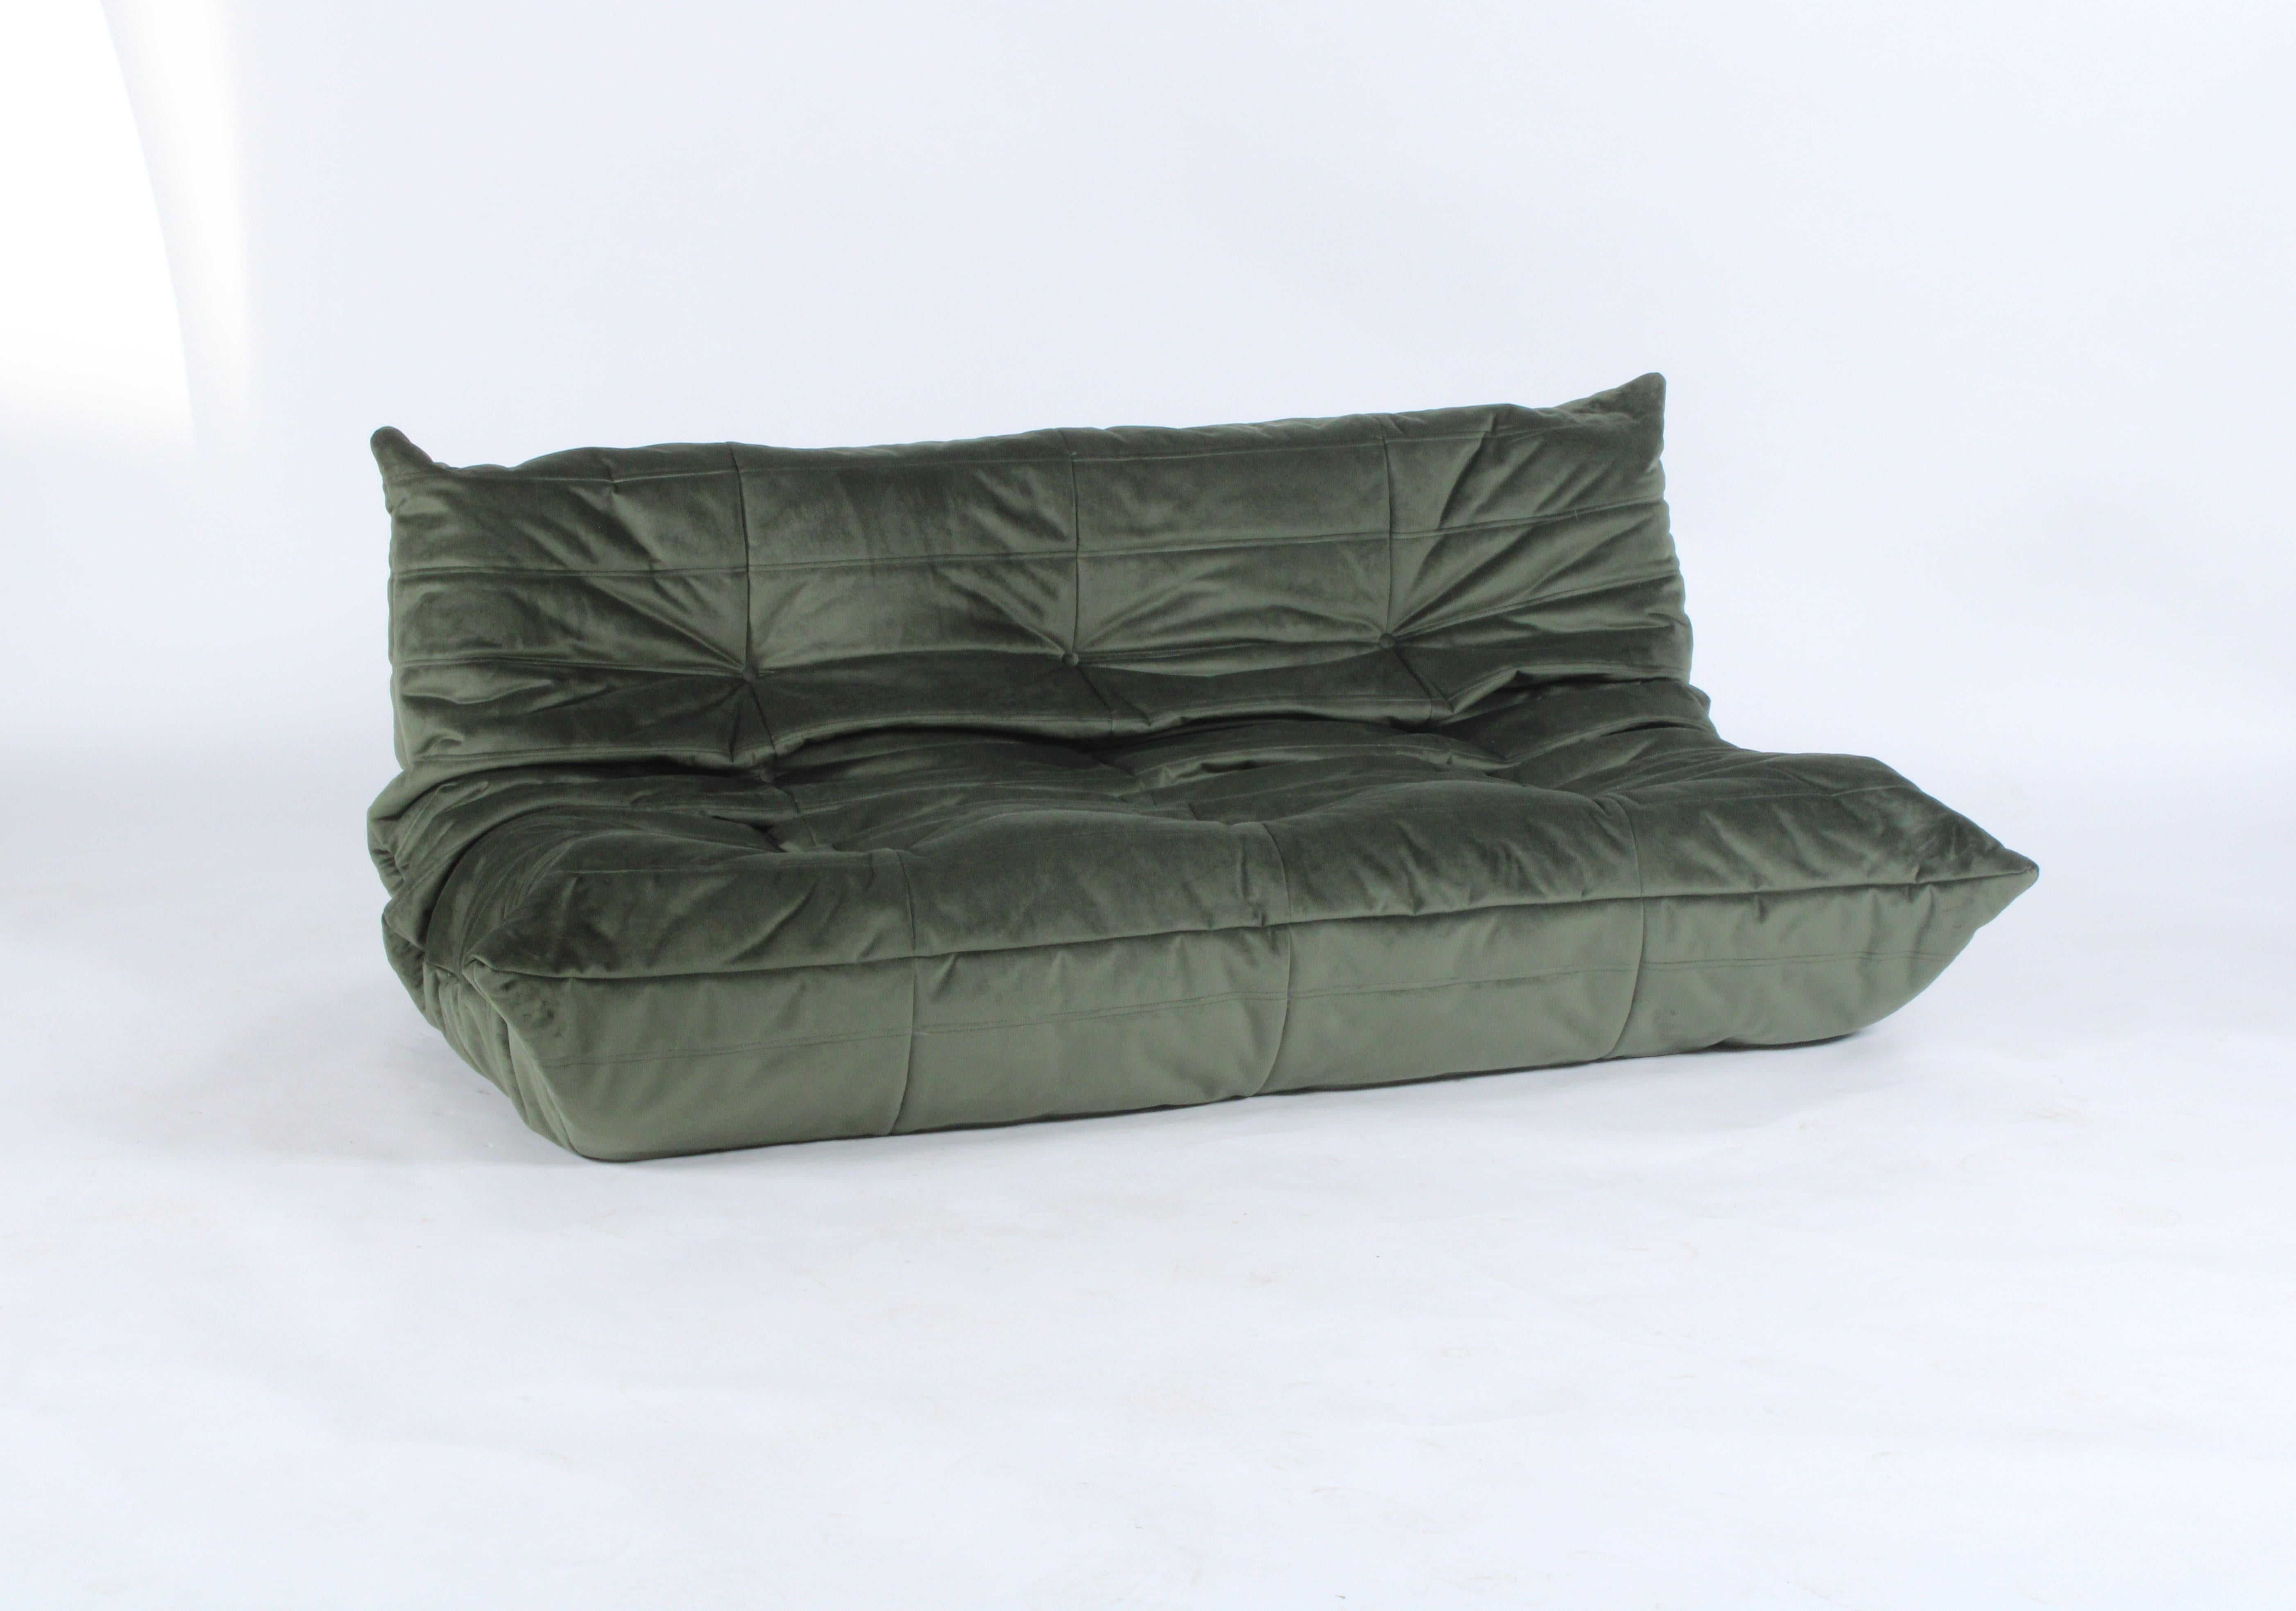 An icon of design the Togo sofa was first designed by Michel Ducaroy for Ligne Roset in the 1970’s and remains as stylish, popular and sought after to this day.  We have had this superb vintage three seater model newly upholstered in a fabulous